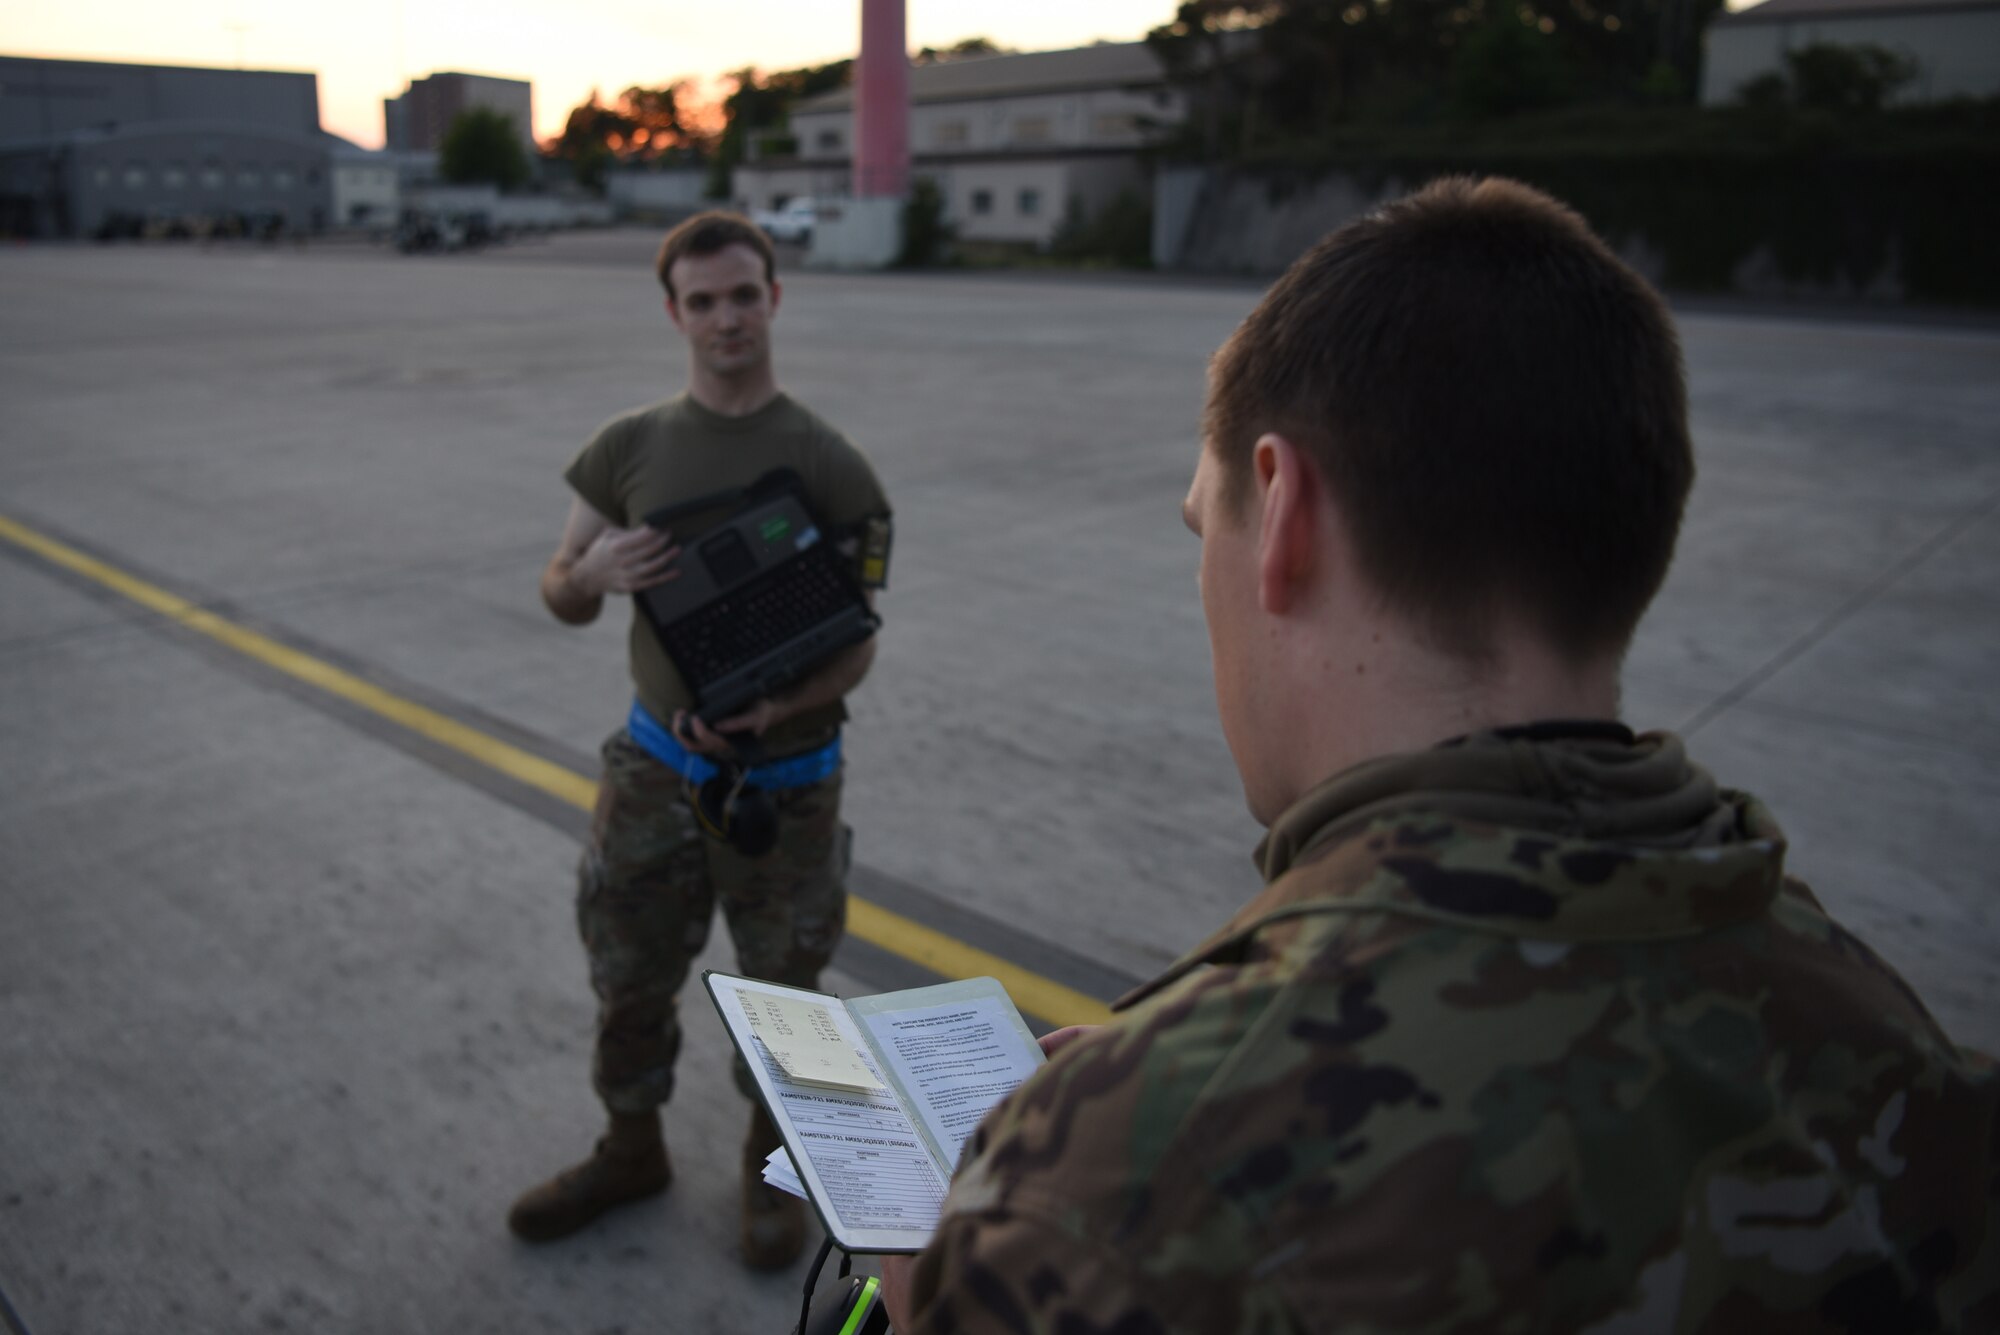 U.S. Air Force Staff Sgt. Taylor J. Eide, right, 721st Aircraft Maintenance Squadron quality assurance inspector, gives a personal evaluation brief to Staff Sgt. Theodore Ellis, 721st AMXS crew chief craftsman, at Ramstein Air Base, Germany, May 21, 2020.